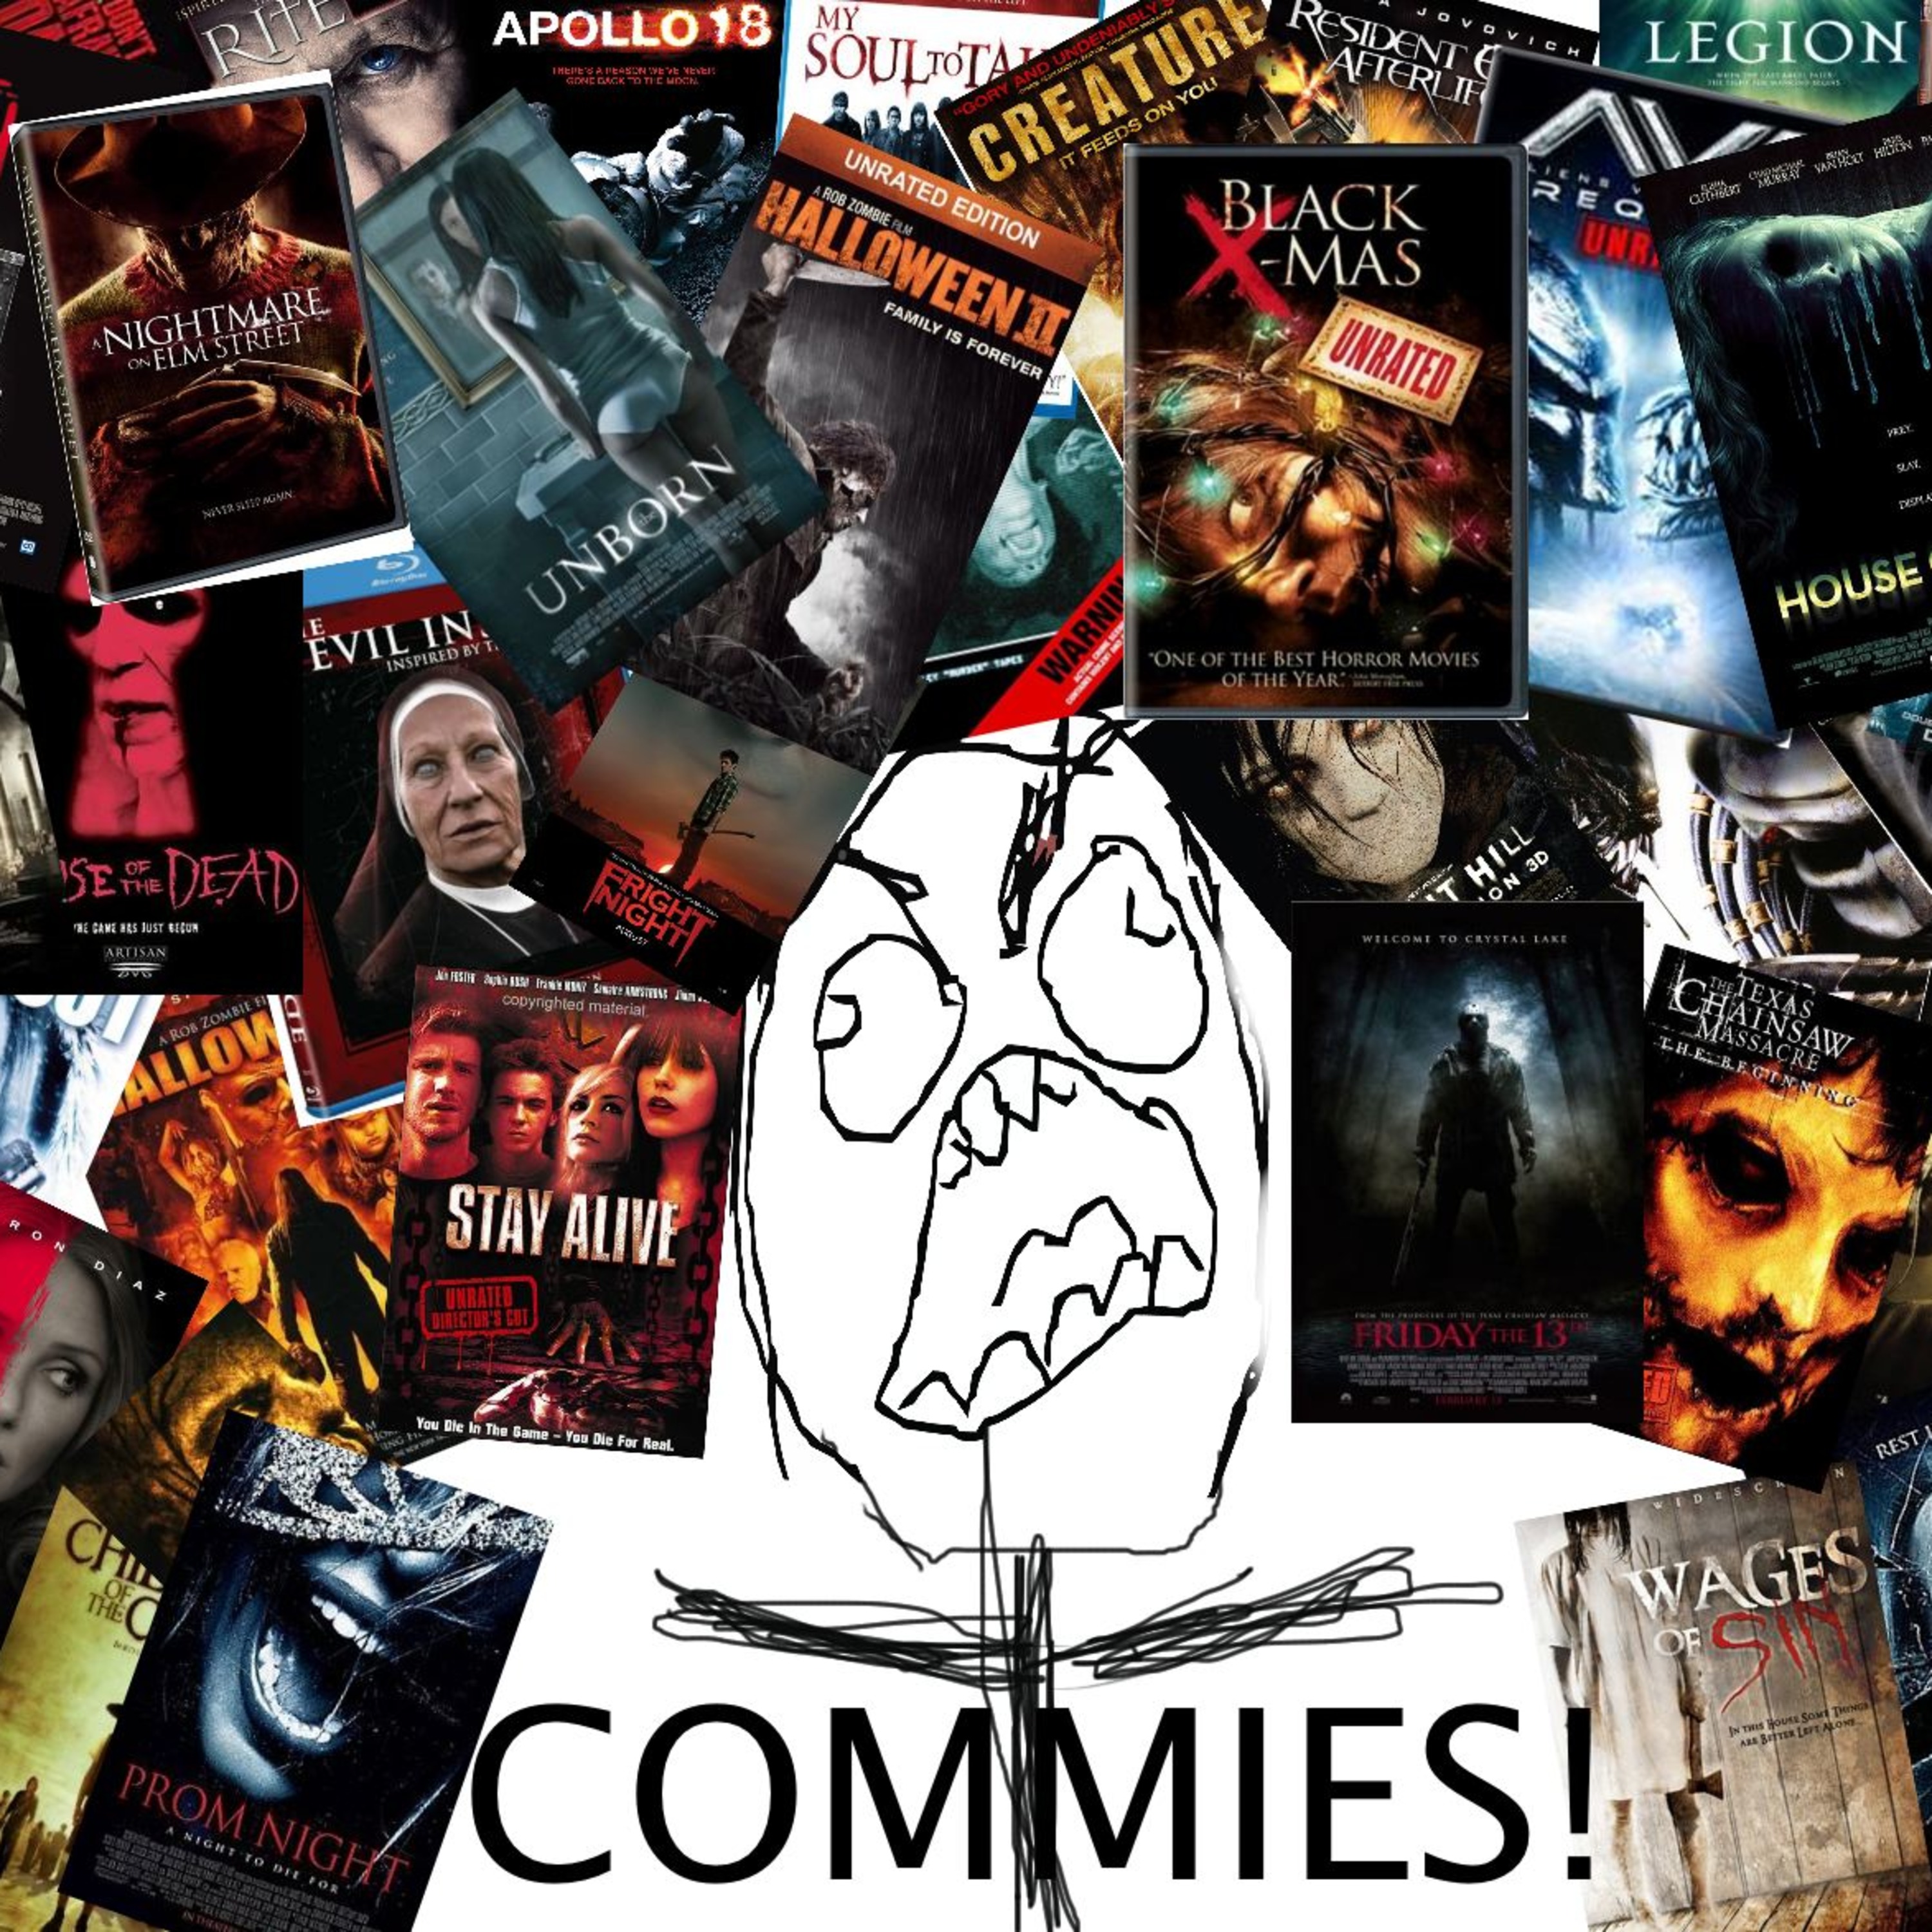 Commies: A Podcast commentary for Horror DVD's